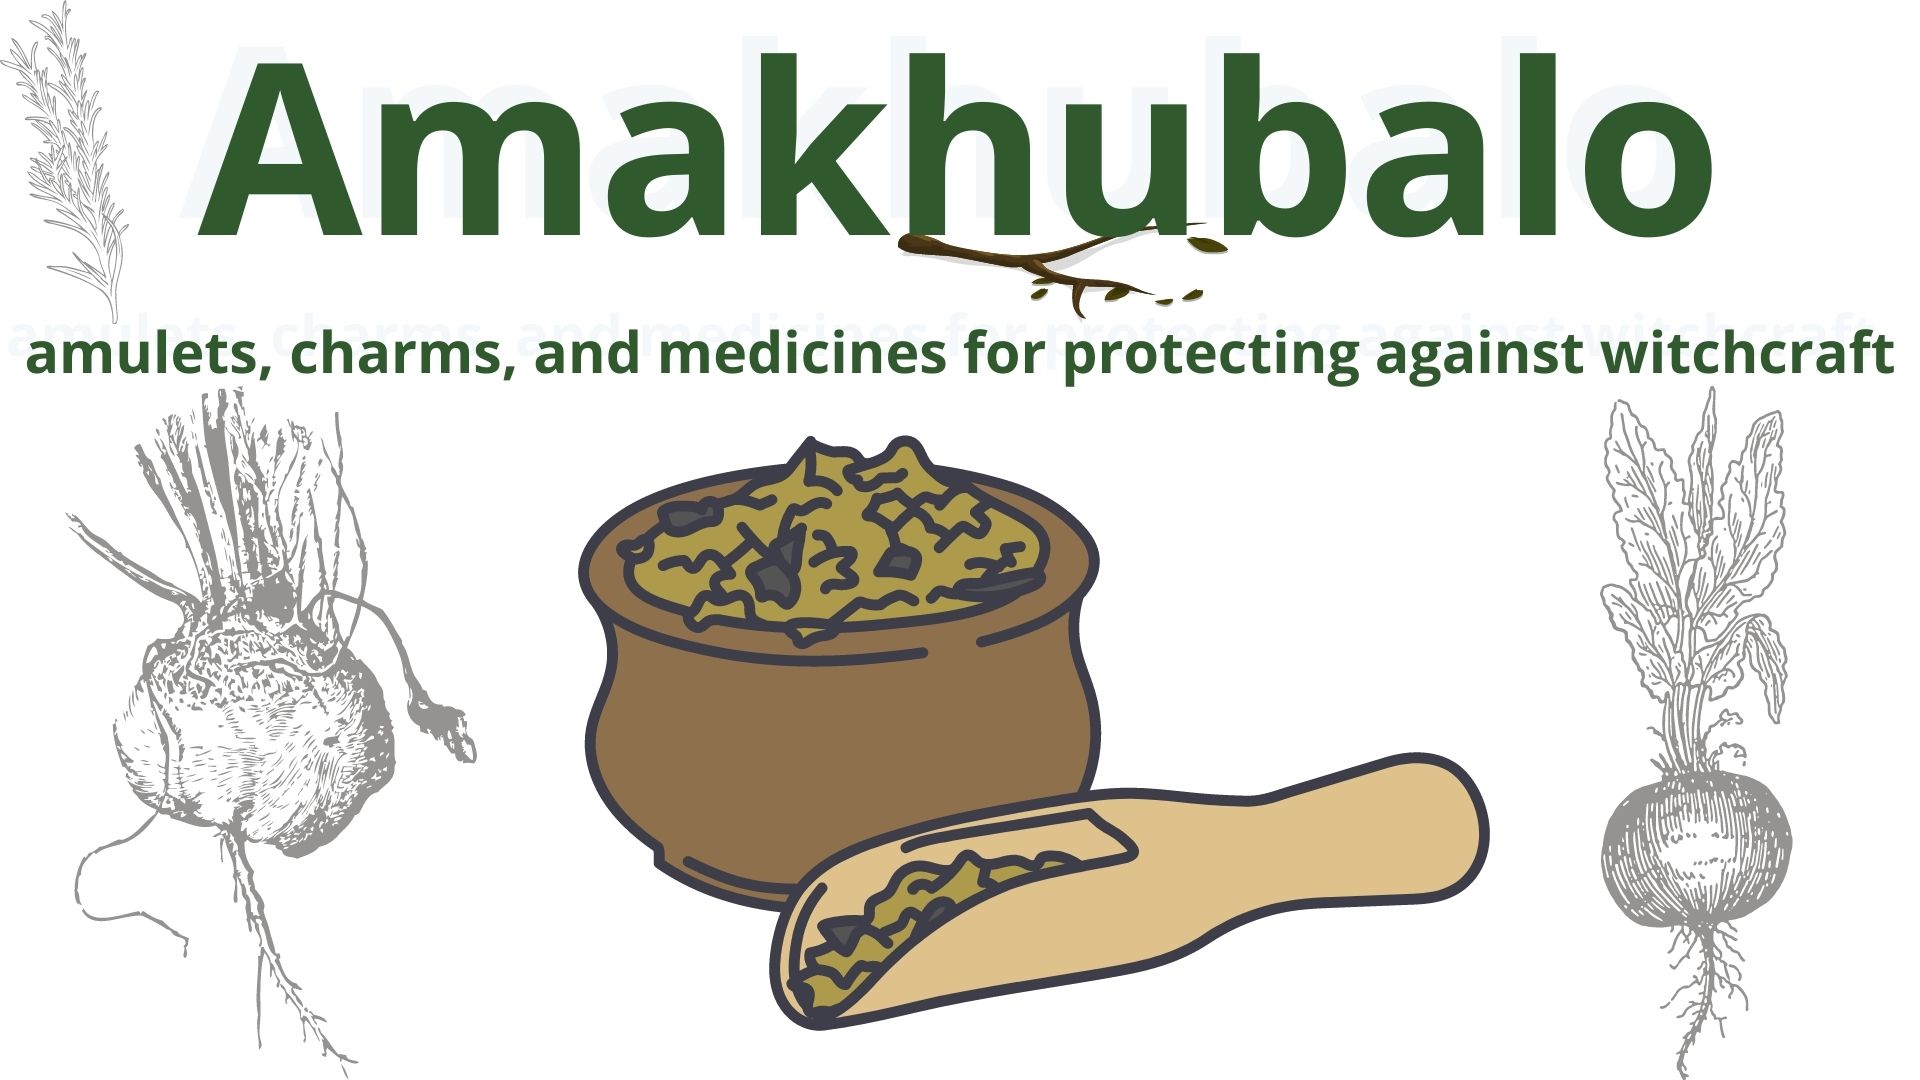 You are currently viewing <strong>Amakhubalo – amulets, charms, and medicines for protecting against witchcraft</strong>